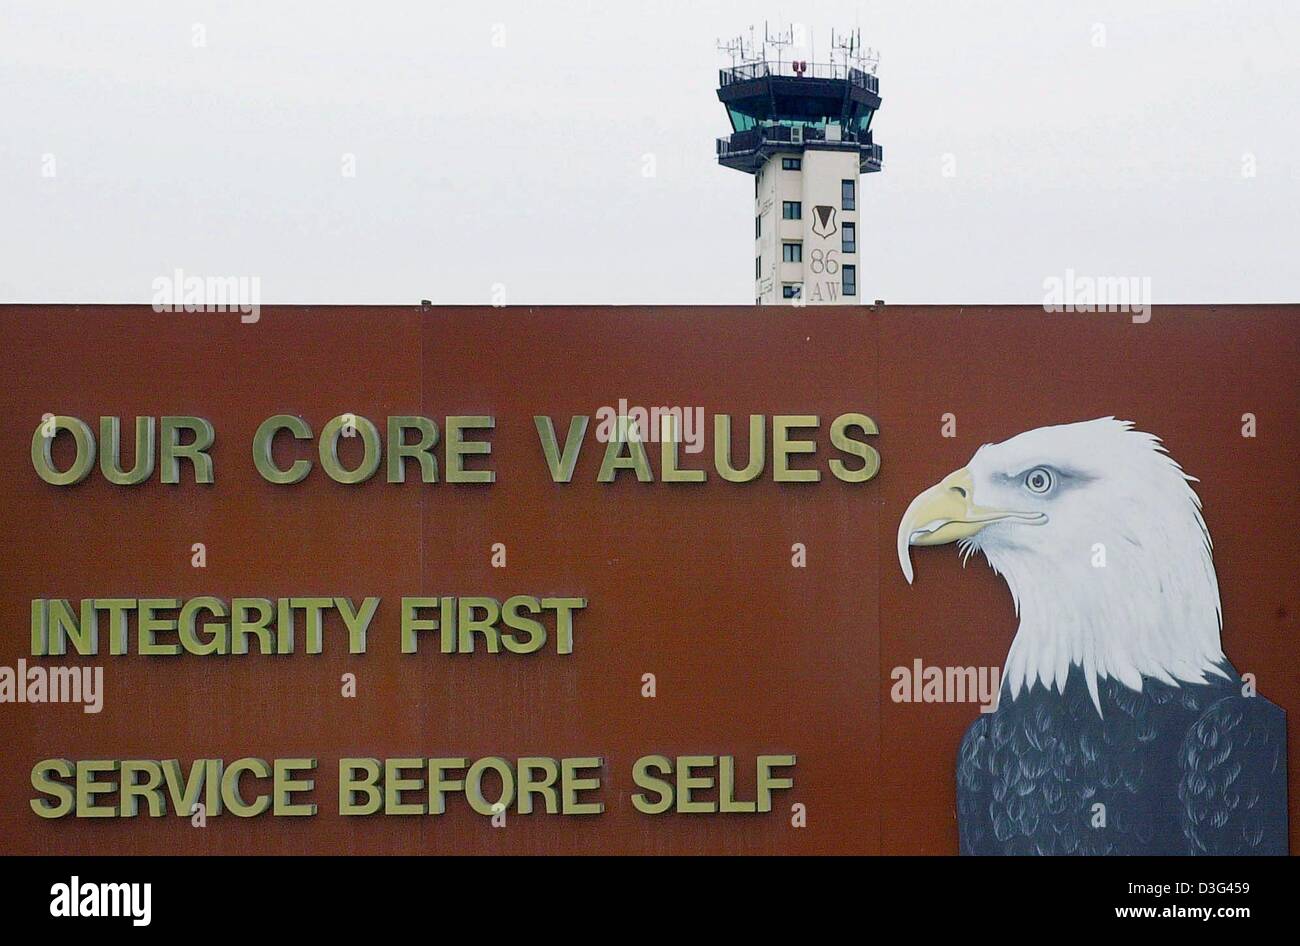 (dpa) - The airport tower protrudes behind a monument with the slogan of the US airbase Ramstein near Landstuhl, western Germany, 10 February 2003. Ramstein is the biggest base of the US air force outside the United States. It is the home of the 86th airlift wing (transportation squadron) and the headquarter of the US Air Forces Europe. According to the newspaper 'Welt am Sonntag'  Stock Photo